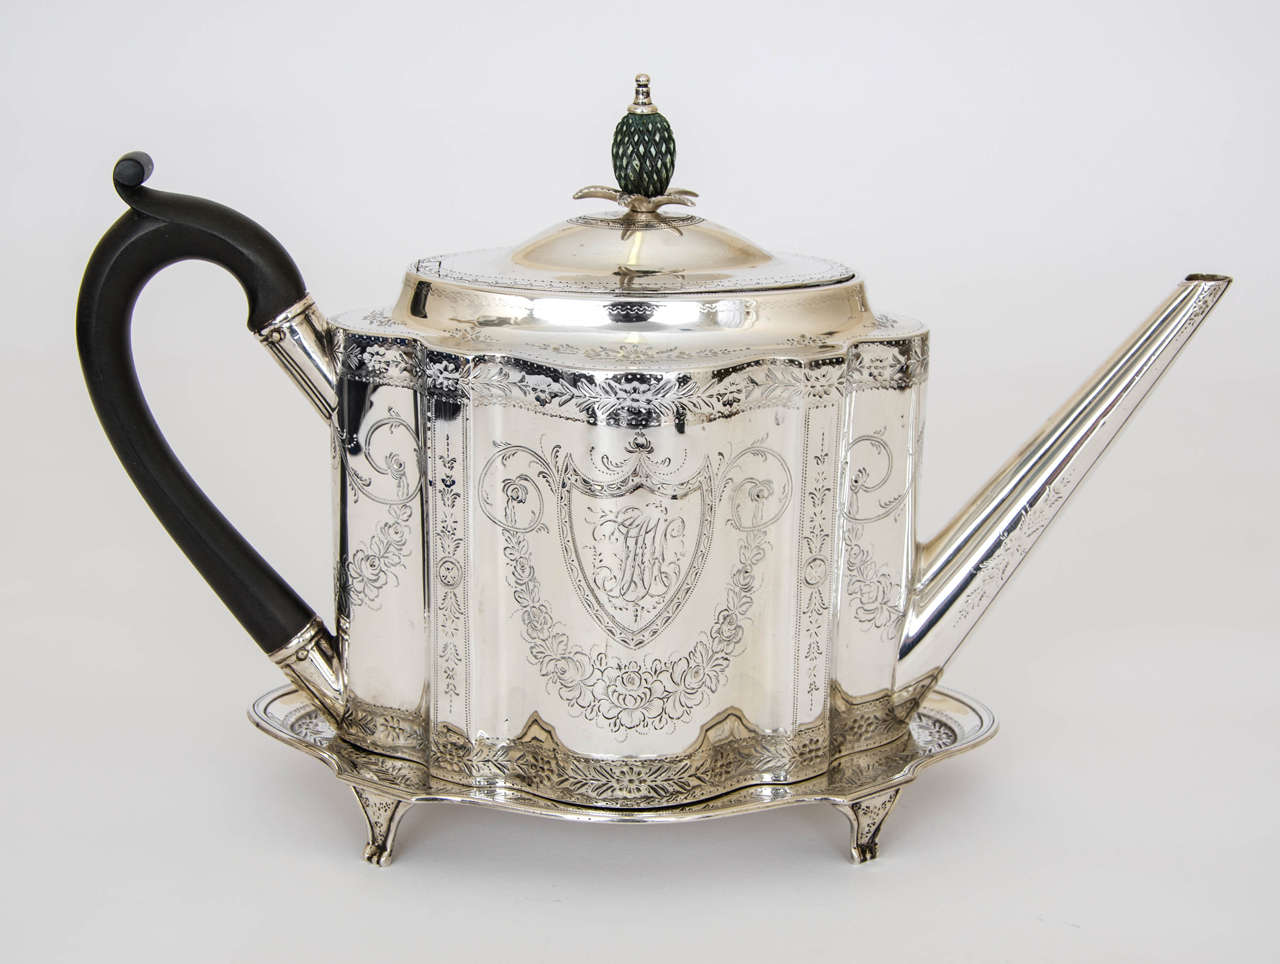 A superb George III antique silver tea pot and stand, the teapot is of serpentine shape with wonderful bright –cut engraving of flowers and foliage, with a cartouche on either side enclosing initials. The bright –cut engraving is repeated on the